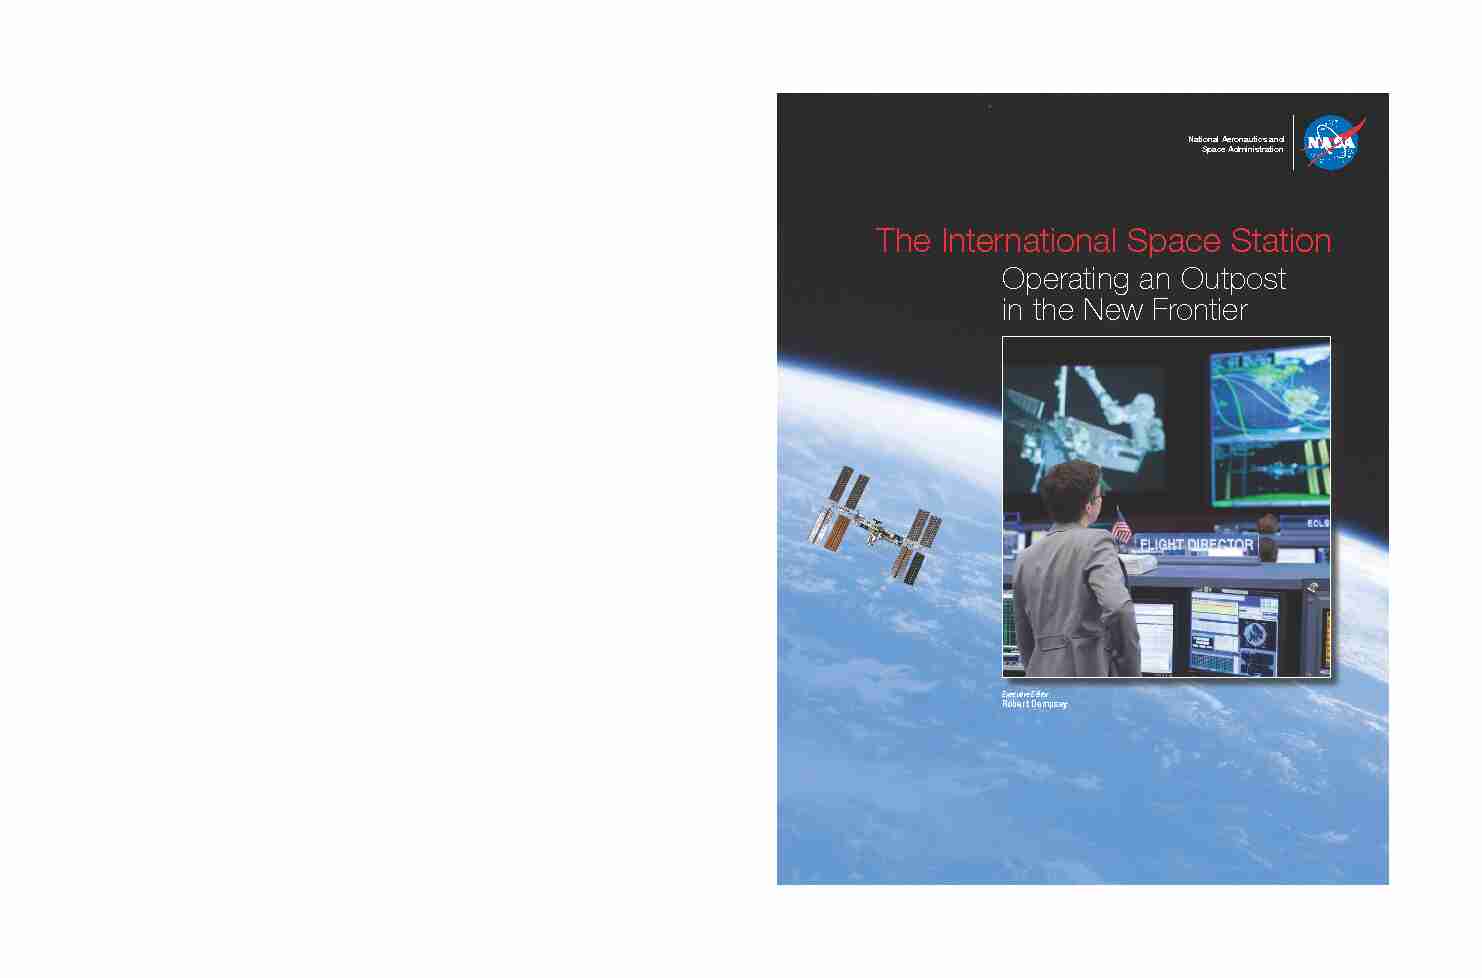 The International Space Station: Operating an Outpost in the New